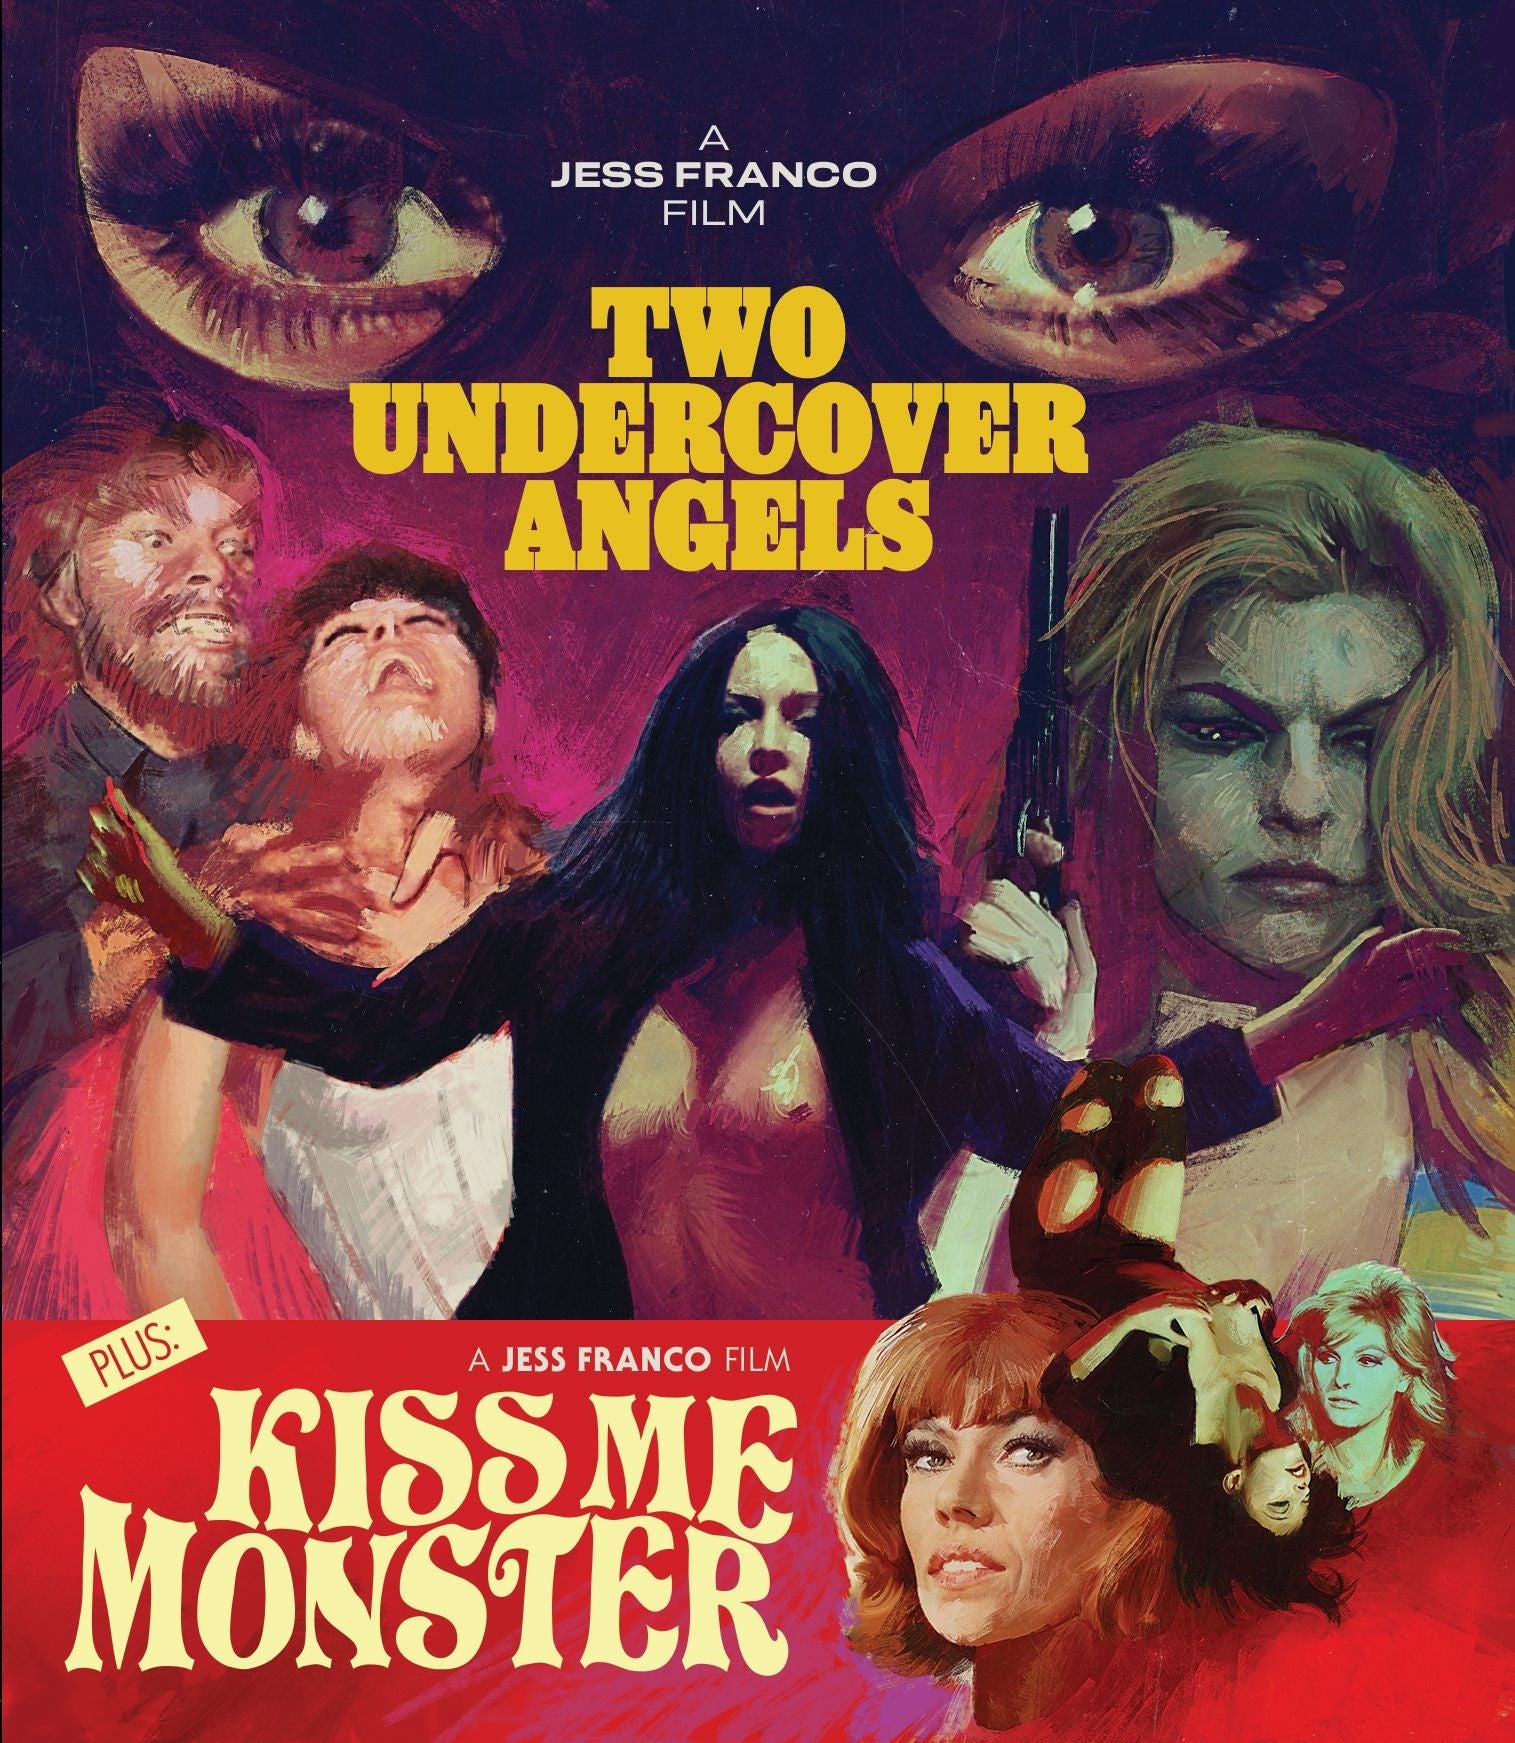 TWO UNDERCOVER ANGELS / KISS ME MONSTER (LIMITED EDITION) BLU-RAY